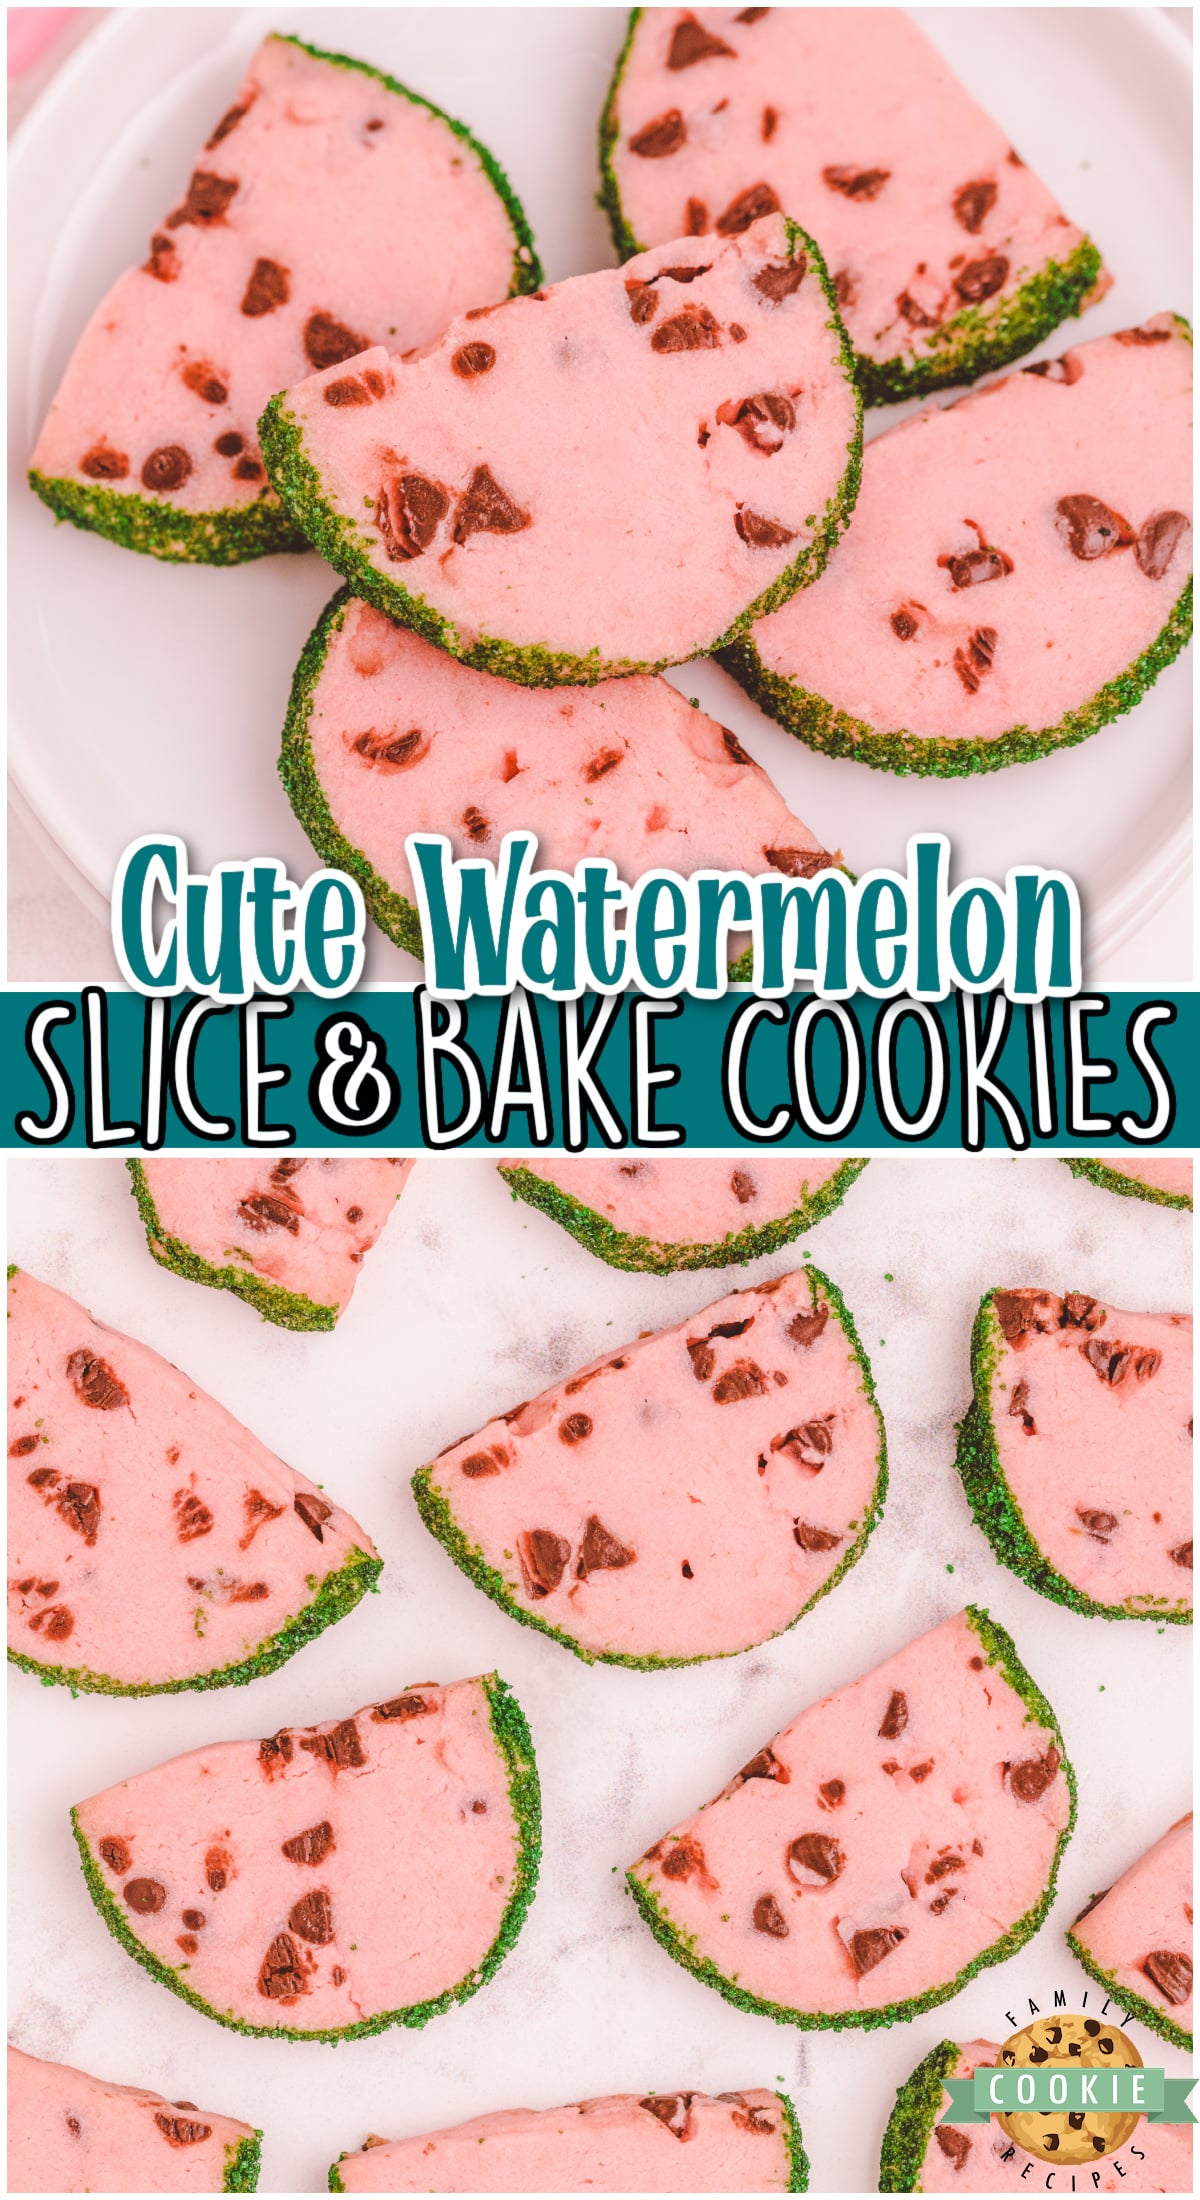 Watermelon Slice and Bake Cookies are a tender summer butter cookie that's made to look like slices of watermelon, complete with a green sprinkle rind and mini chocolate chip seeds!